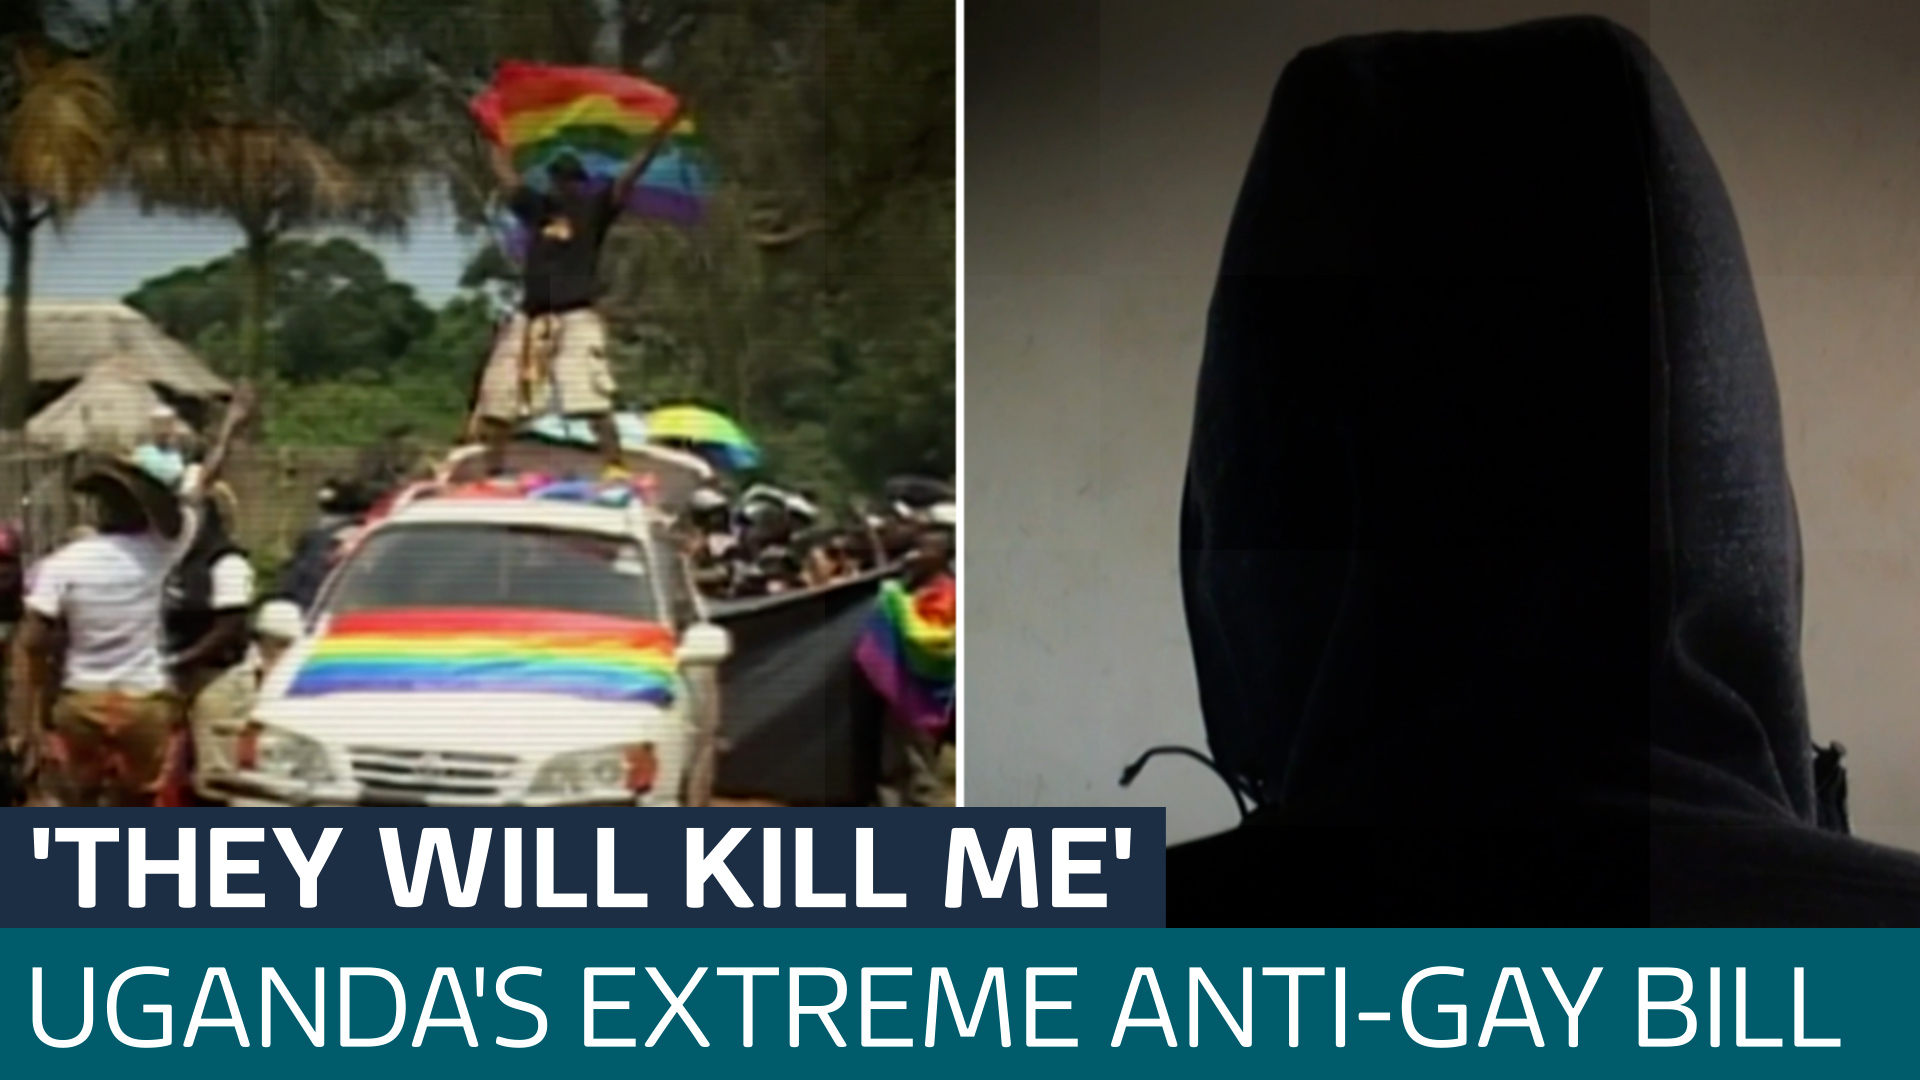 Lgbt Community In Uganda Living In Fear Under Some Of The World S Harshest Anti Gay Measures